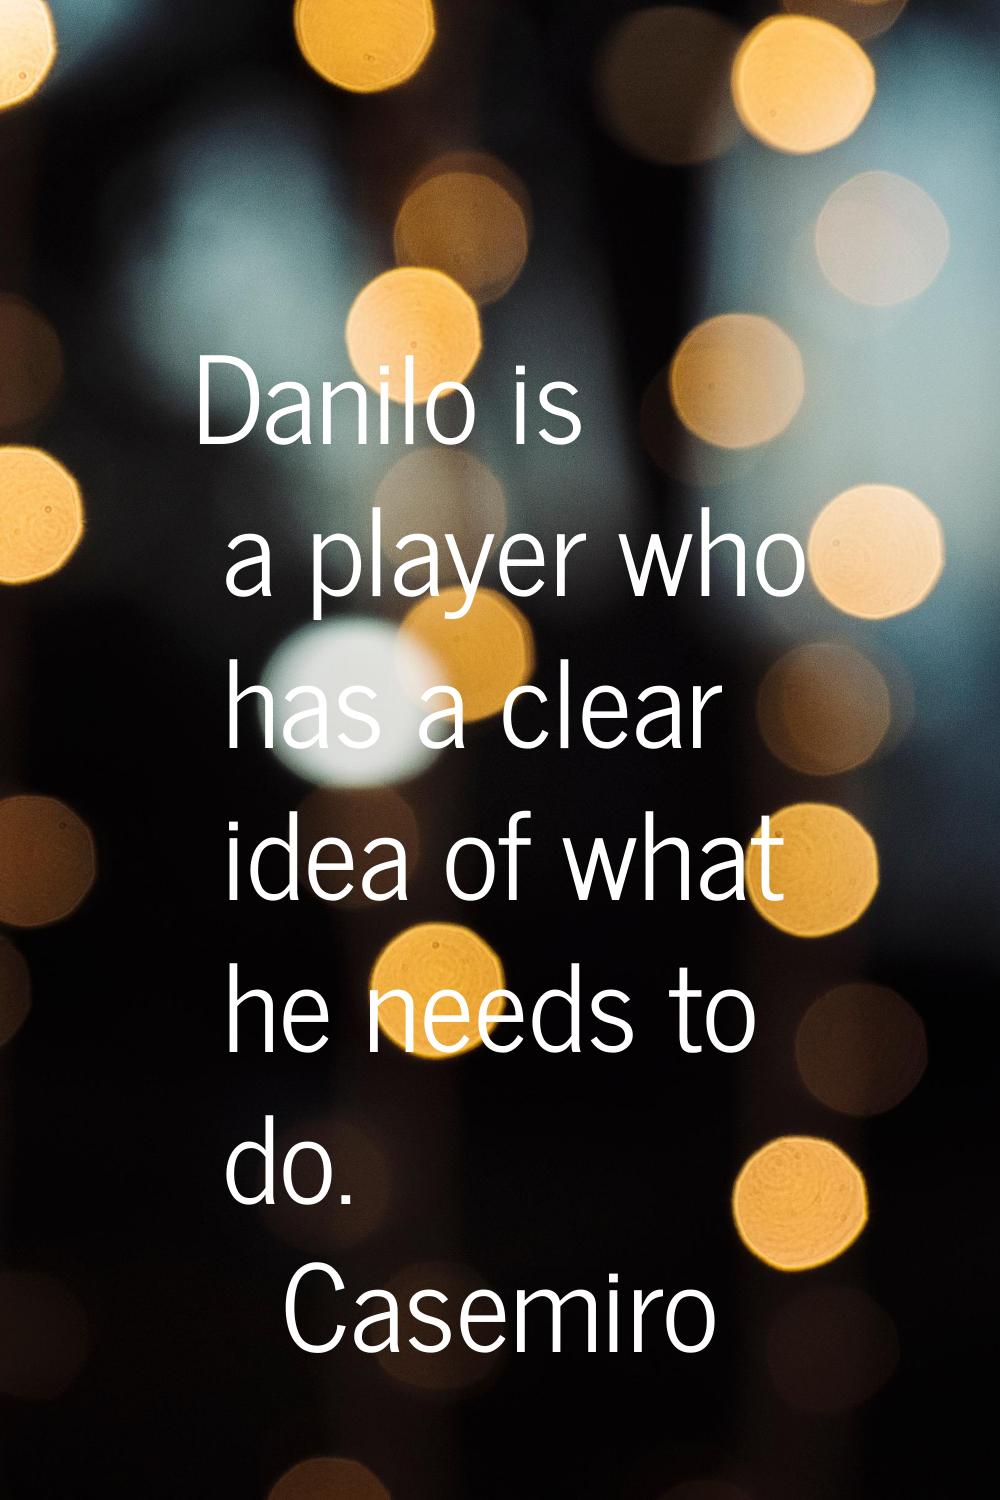 Danilo is a player who has a clear idea of what he needs to do.